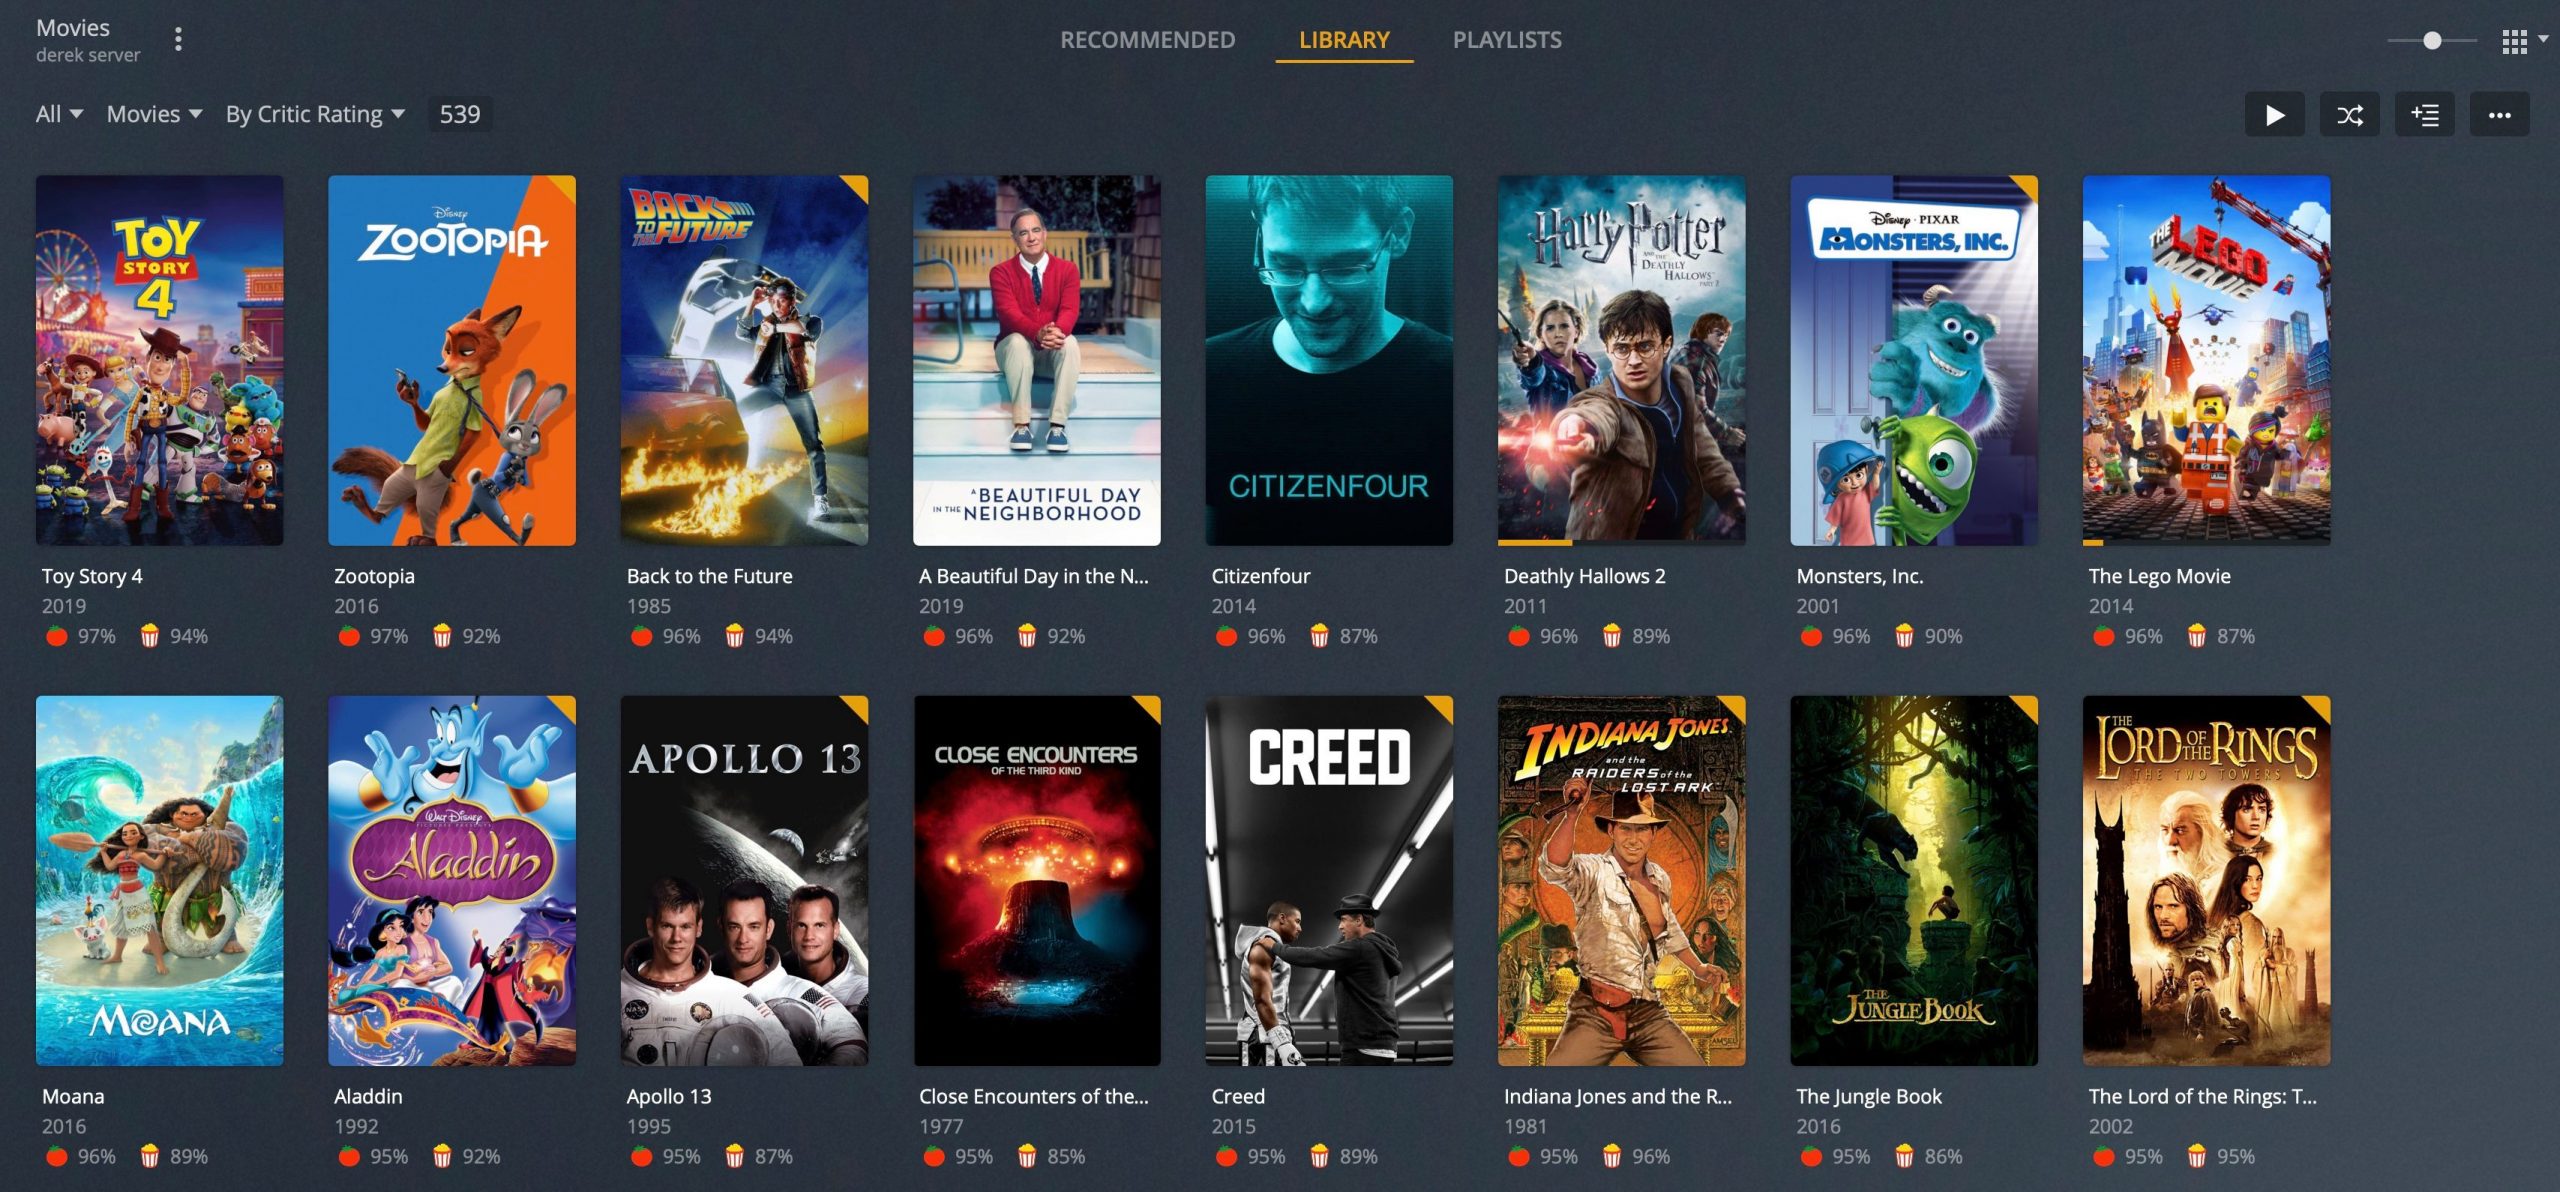 Turn your old Mac into a video streaming service with Plex